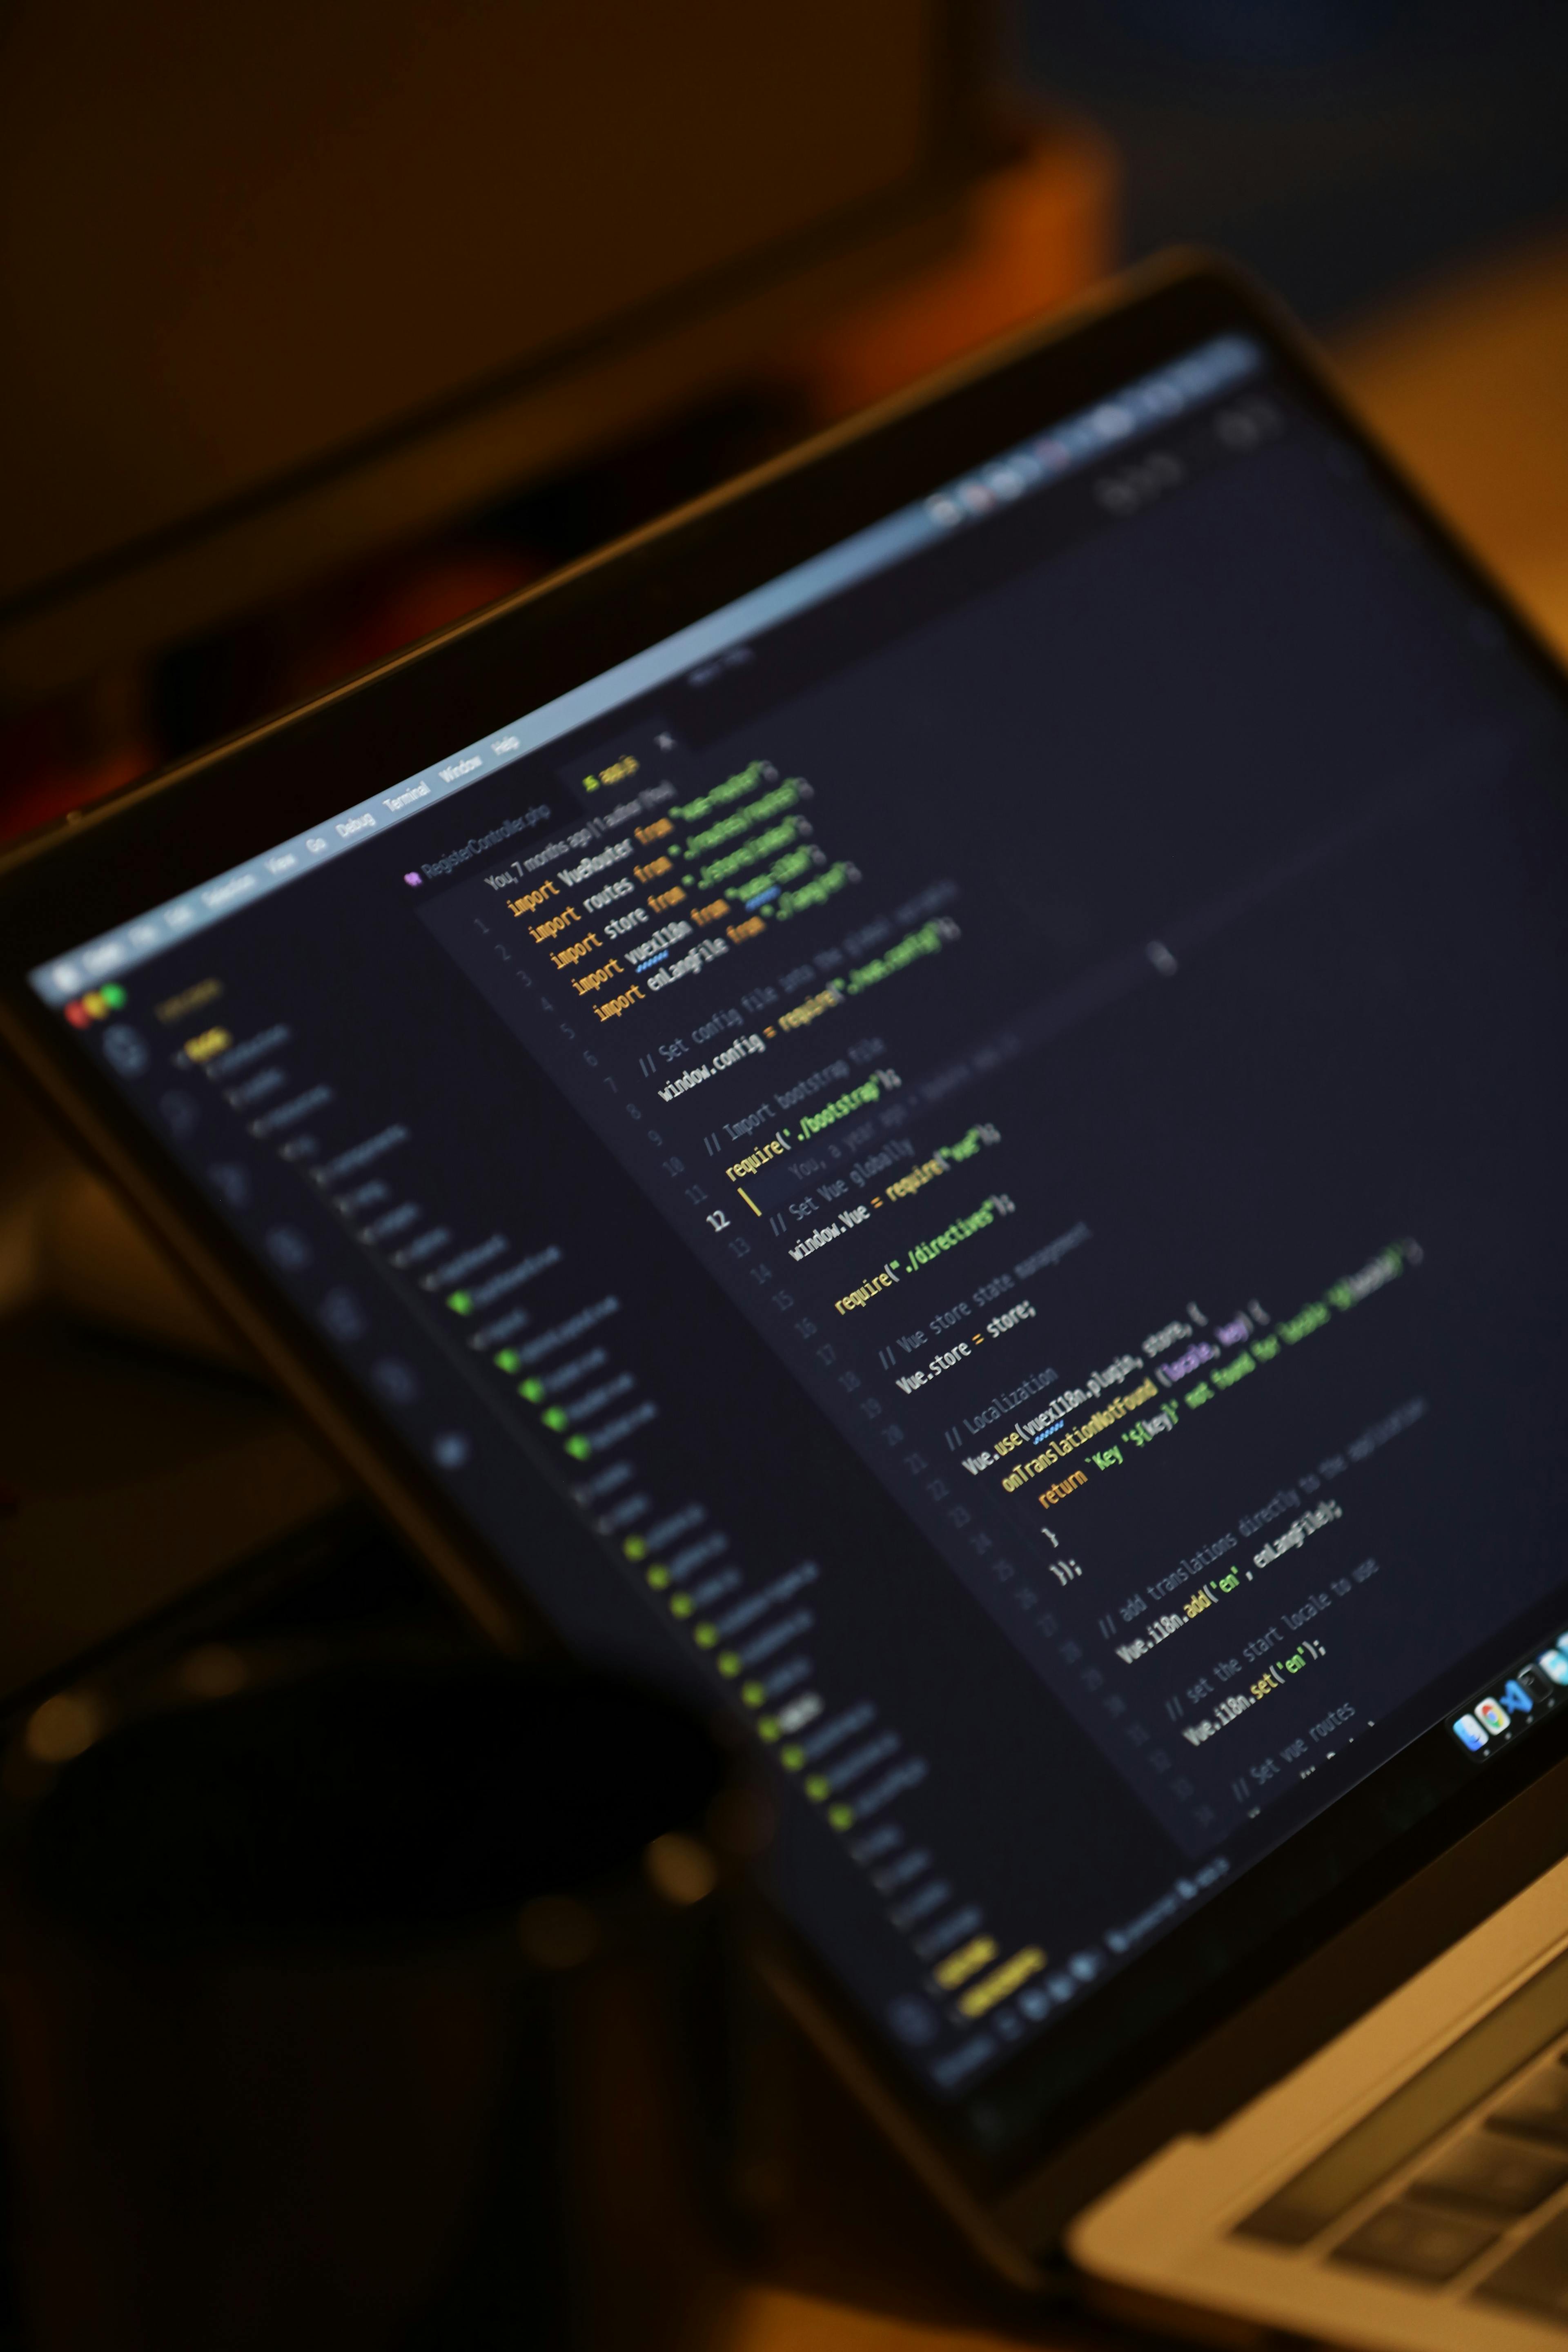 Prioritizing Code Quality: Beyond Good Code, Aim for Issue-Free Development